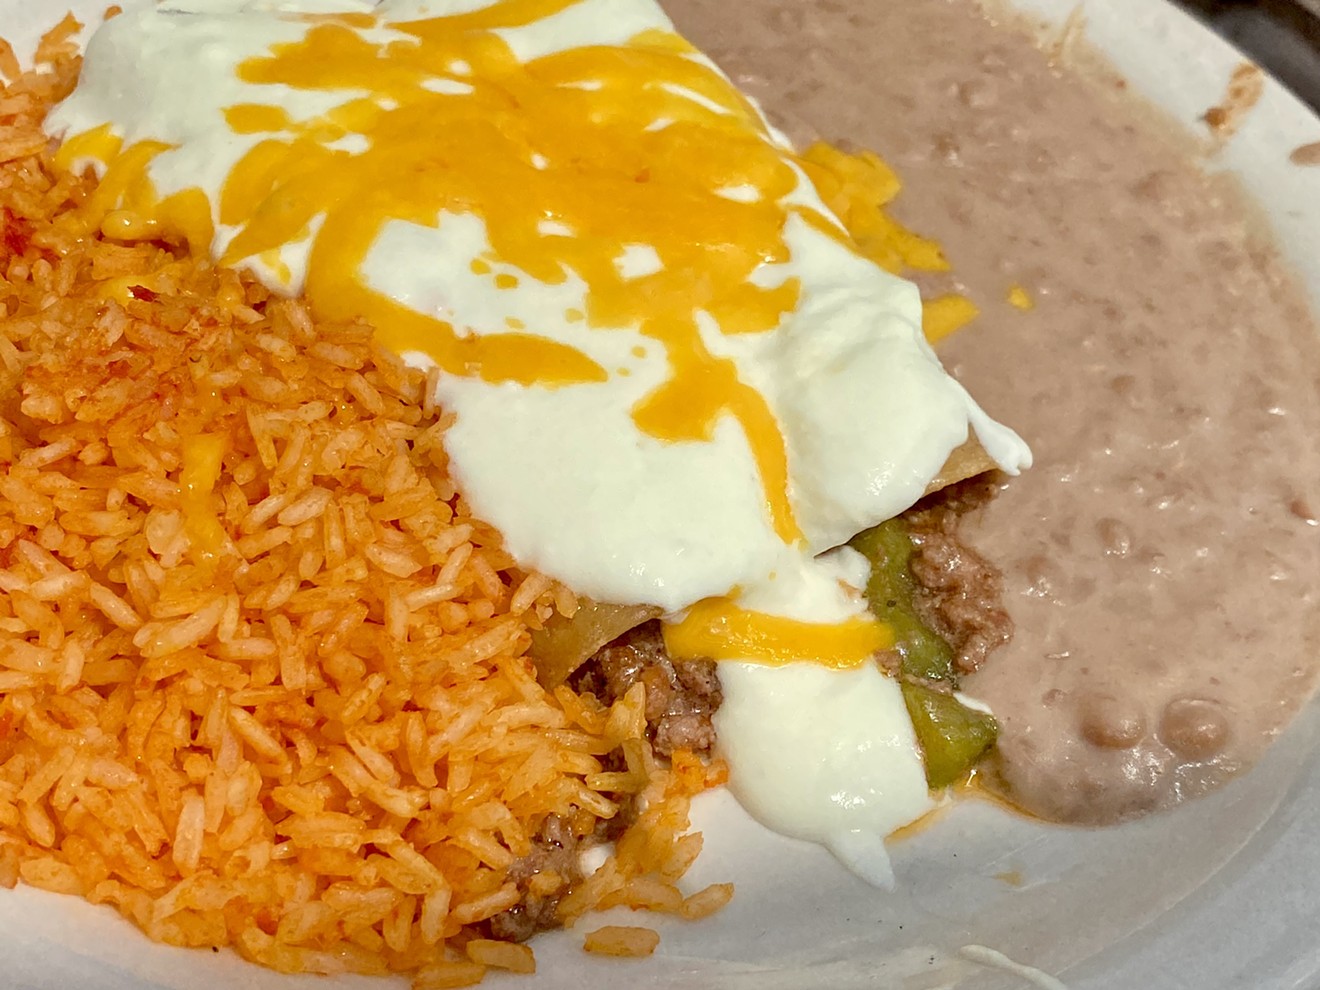 Didn't matter what it was slathered over, the sour cream sauce was a must at a final last visit to Herrera's on Sylvan this past Friday.